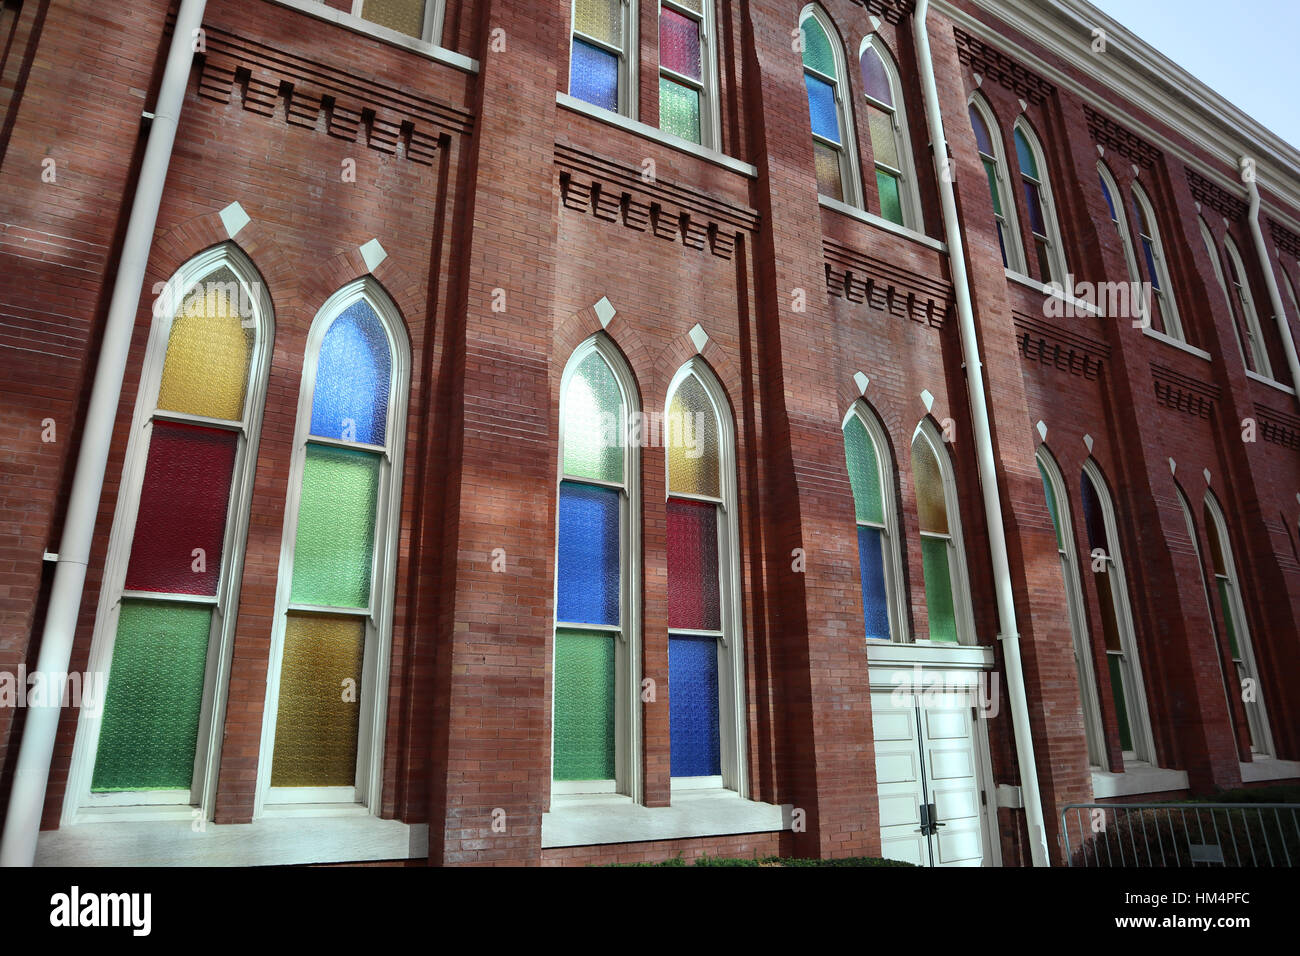 Colorful windows on the exterior of the Ryman Auditorium in Nashville, Tennessee, USA Stock Photo